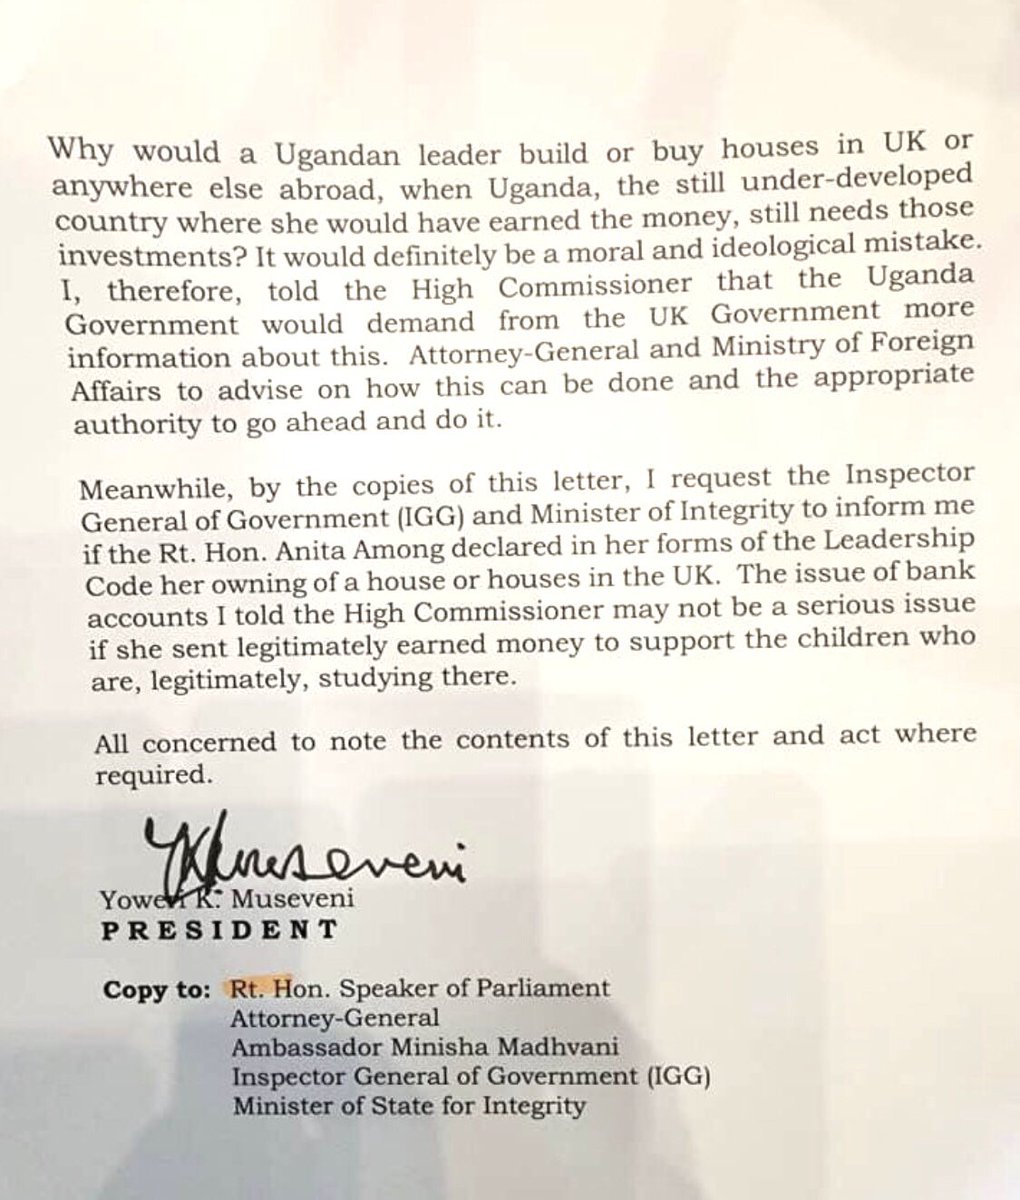 Since the NRM/M7 Junta now conducts diplomacy in the social media, can they also share the letters from the British government, so that we get a full picture? @GenJejeOdongo @UgandaMFA @KagutaMuseveni